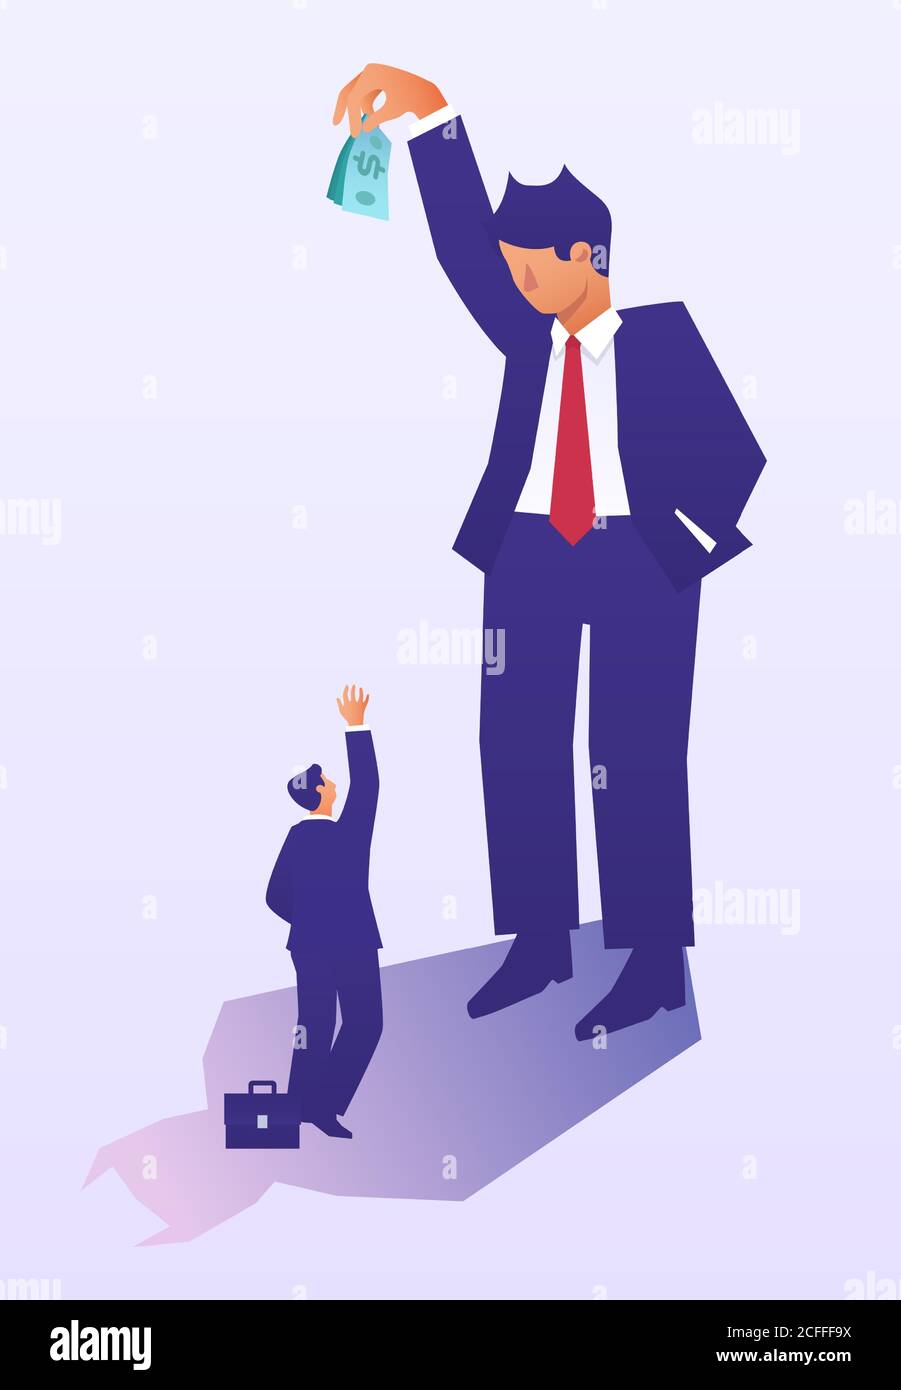 Cut wages - business illustration. Big Boss takes away money from tiny employee. Cut of salary, income or payments during finance crisis Stock Vector